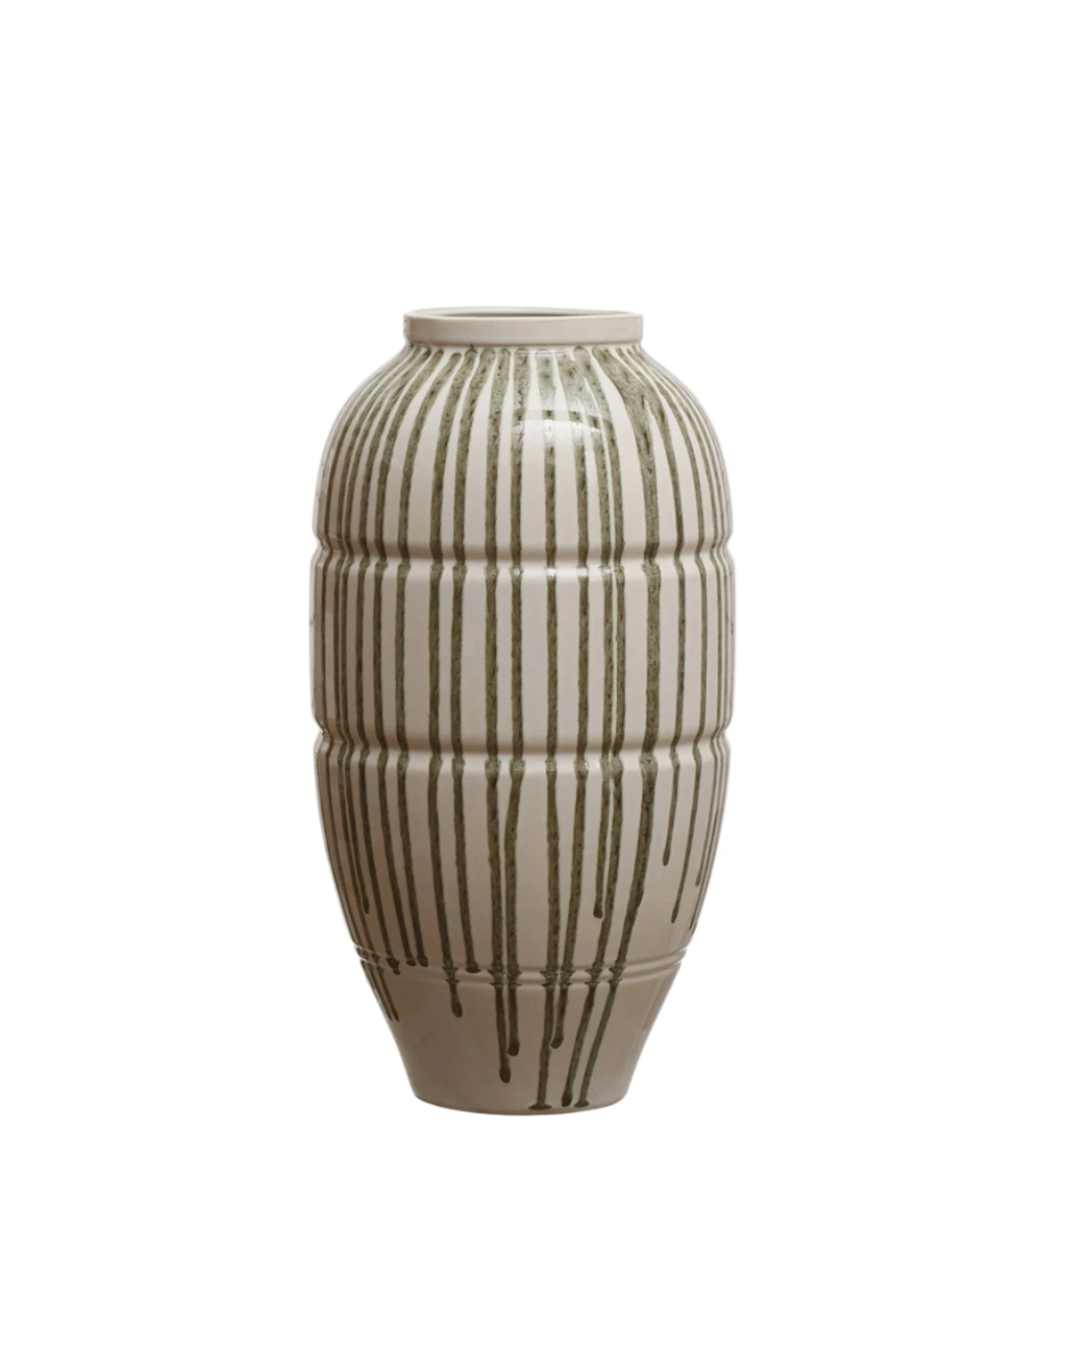 A stoneware vase from Creative Co-op with a beige background featuring vertical, ridged patterns and green dripped glaze lines. Stands upright with a tapered top in a style evocative of a Scottsdale Arizona bungalow.